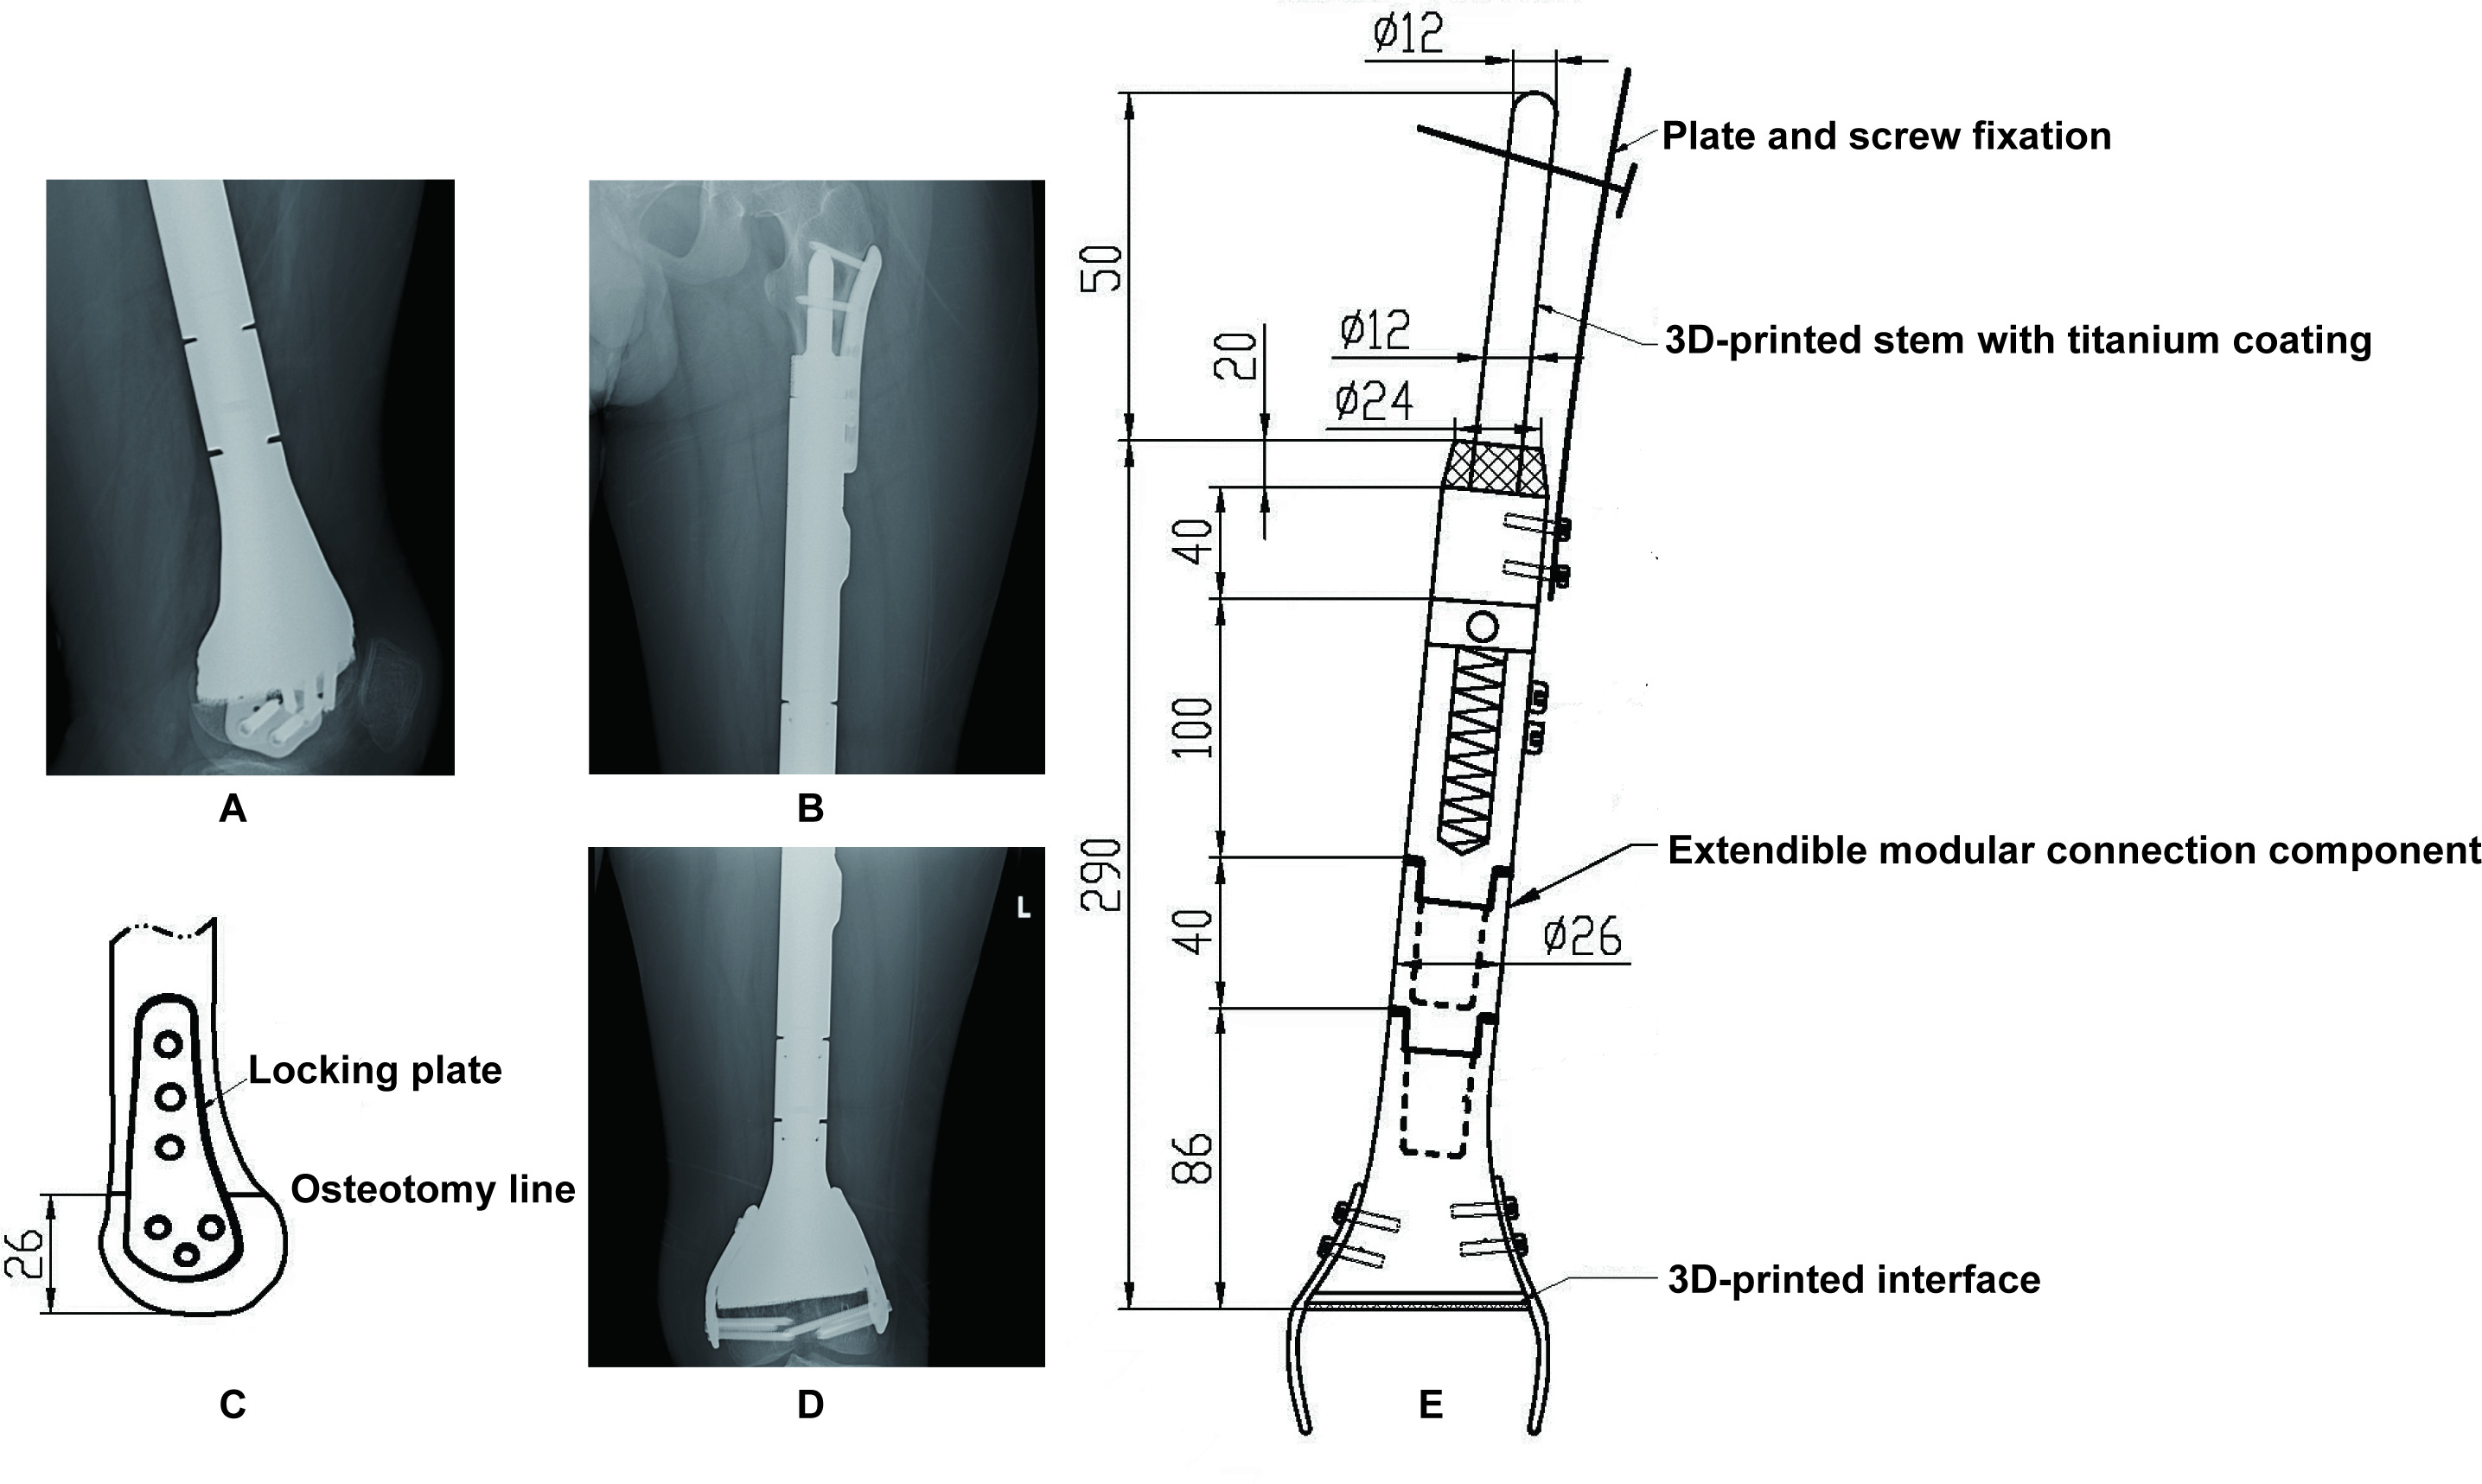 Fig. 1 
              Radiographs and design of the 3D-printed prosthesis of a ten-year old male. a) Lateral radiographs of the distal component 20 months postoperatively; b) anteroposterior radiographs of proximal stem; c) distal 3D-printed component on design proposal fixed by the locking screw and plate; d) anteroposterior radiographs of the distal component; and e) the gross view of the prosthesis on design proposal showing the proximal 3D-printed stem with a titanium coating, a modular connection component in the middle part, and a distal 3D-printed component.
            